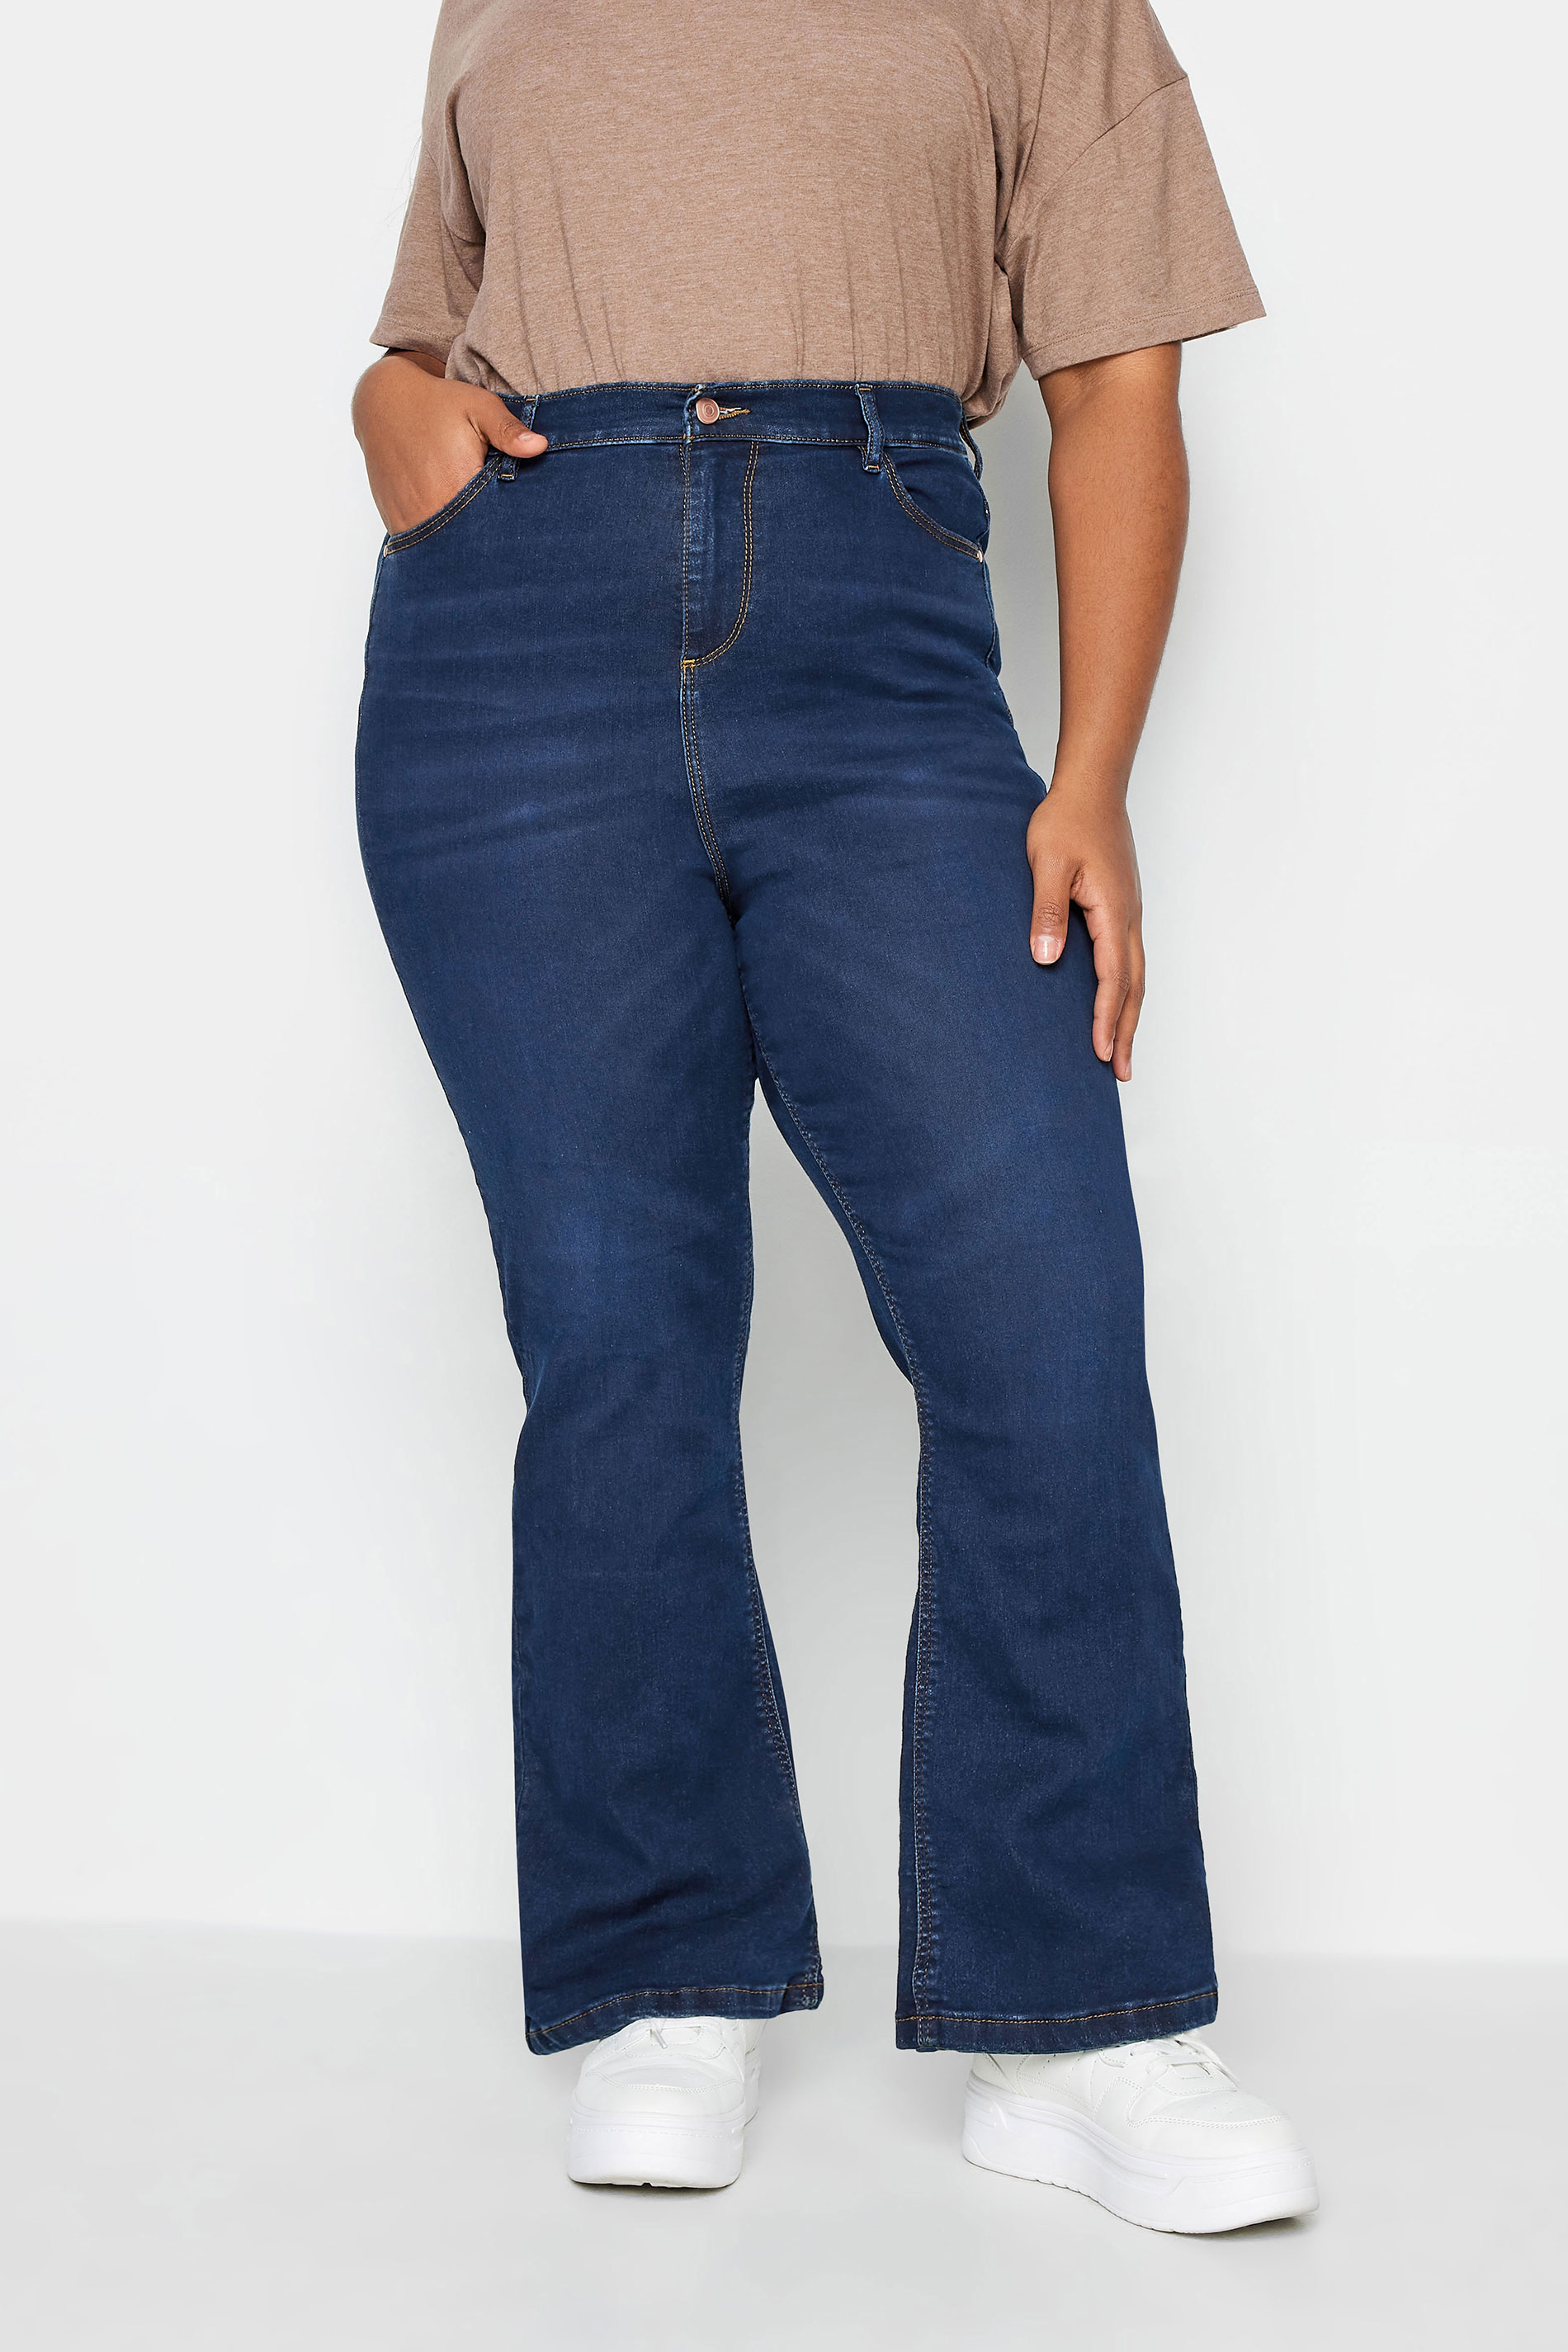 YOURS Plus Size Indigo Blue Bootcut Stretch ISLA Jeans | Yours Clothing